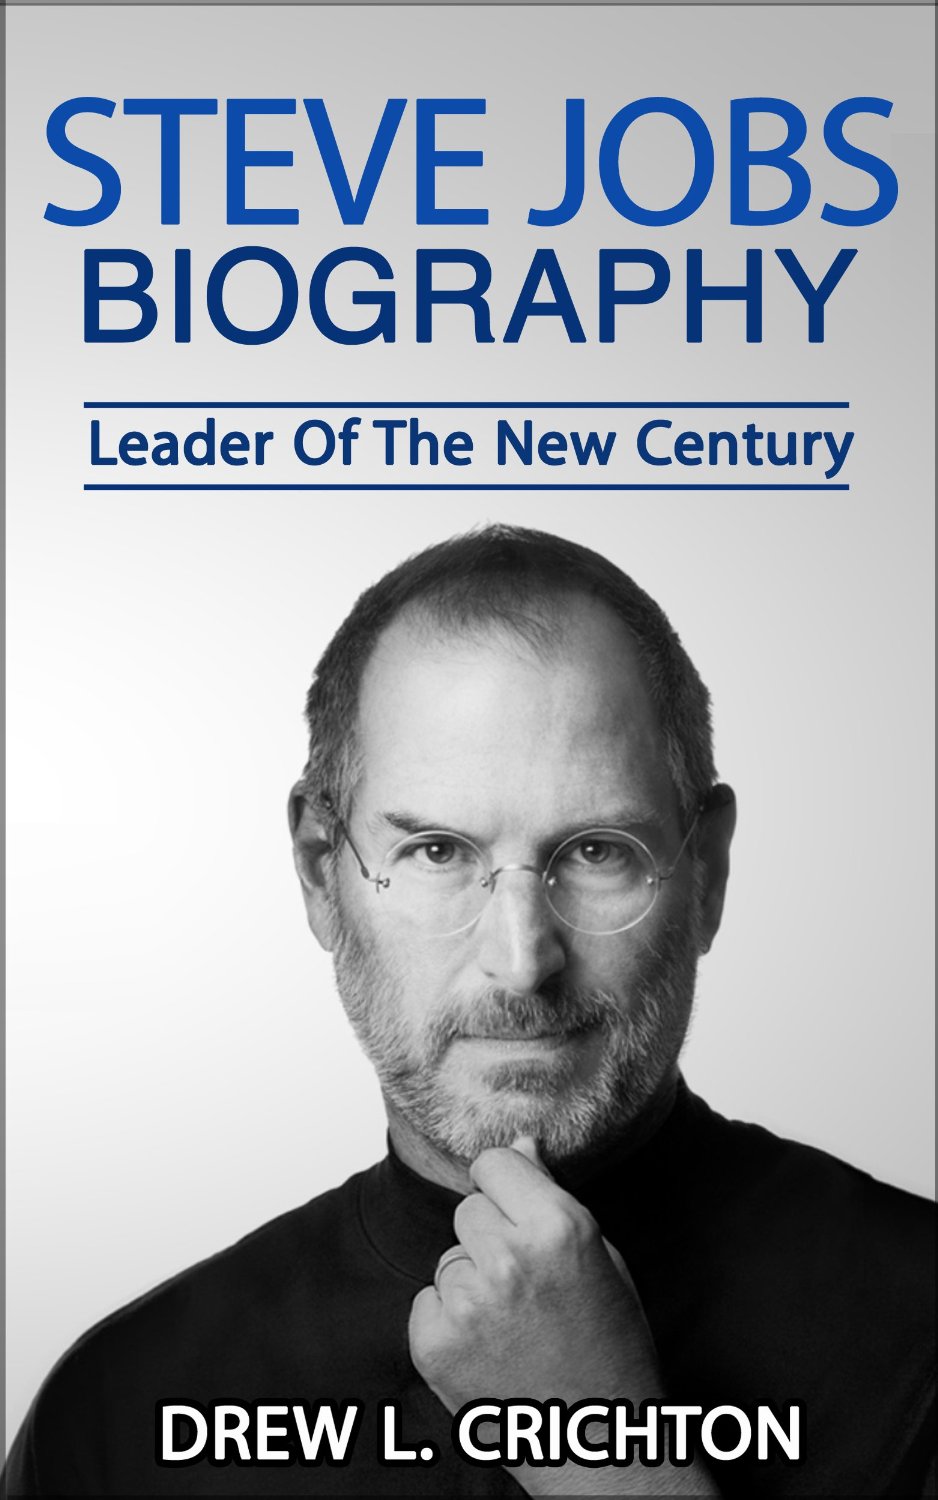 Steve Jobs Biography – Leader Of The New Century by Drew L. Crichton